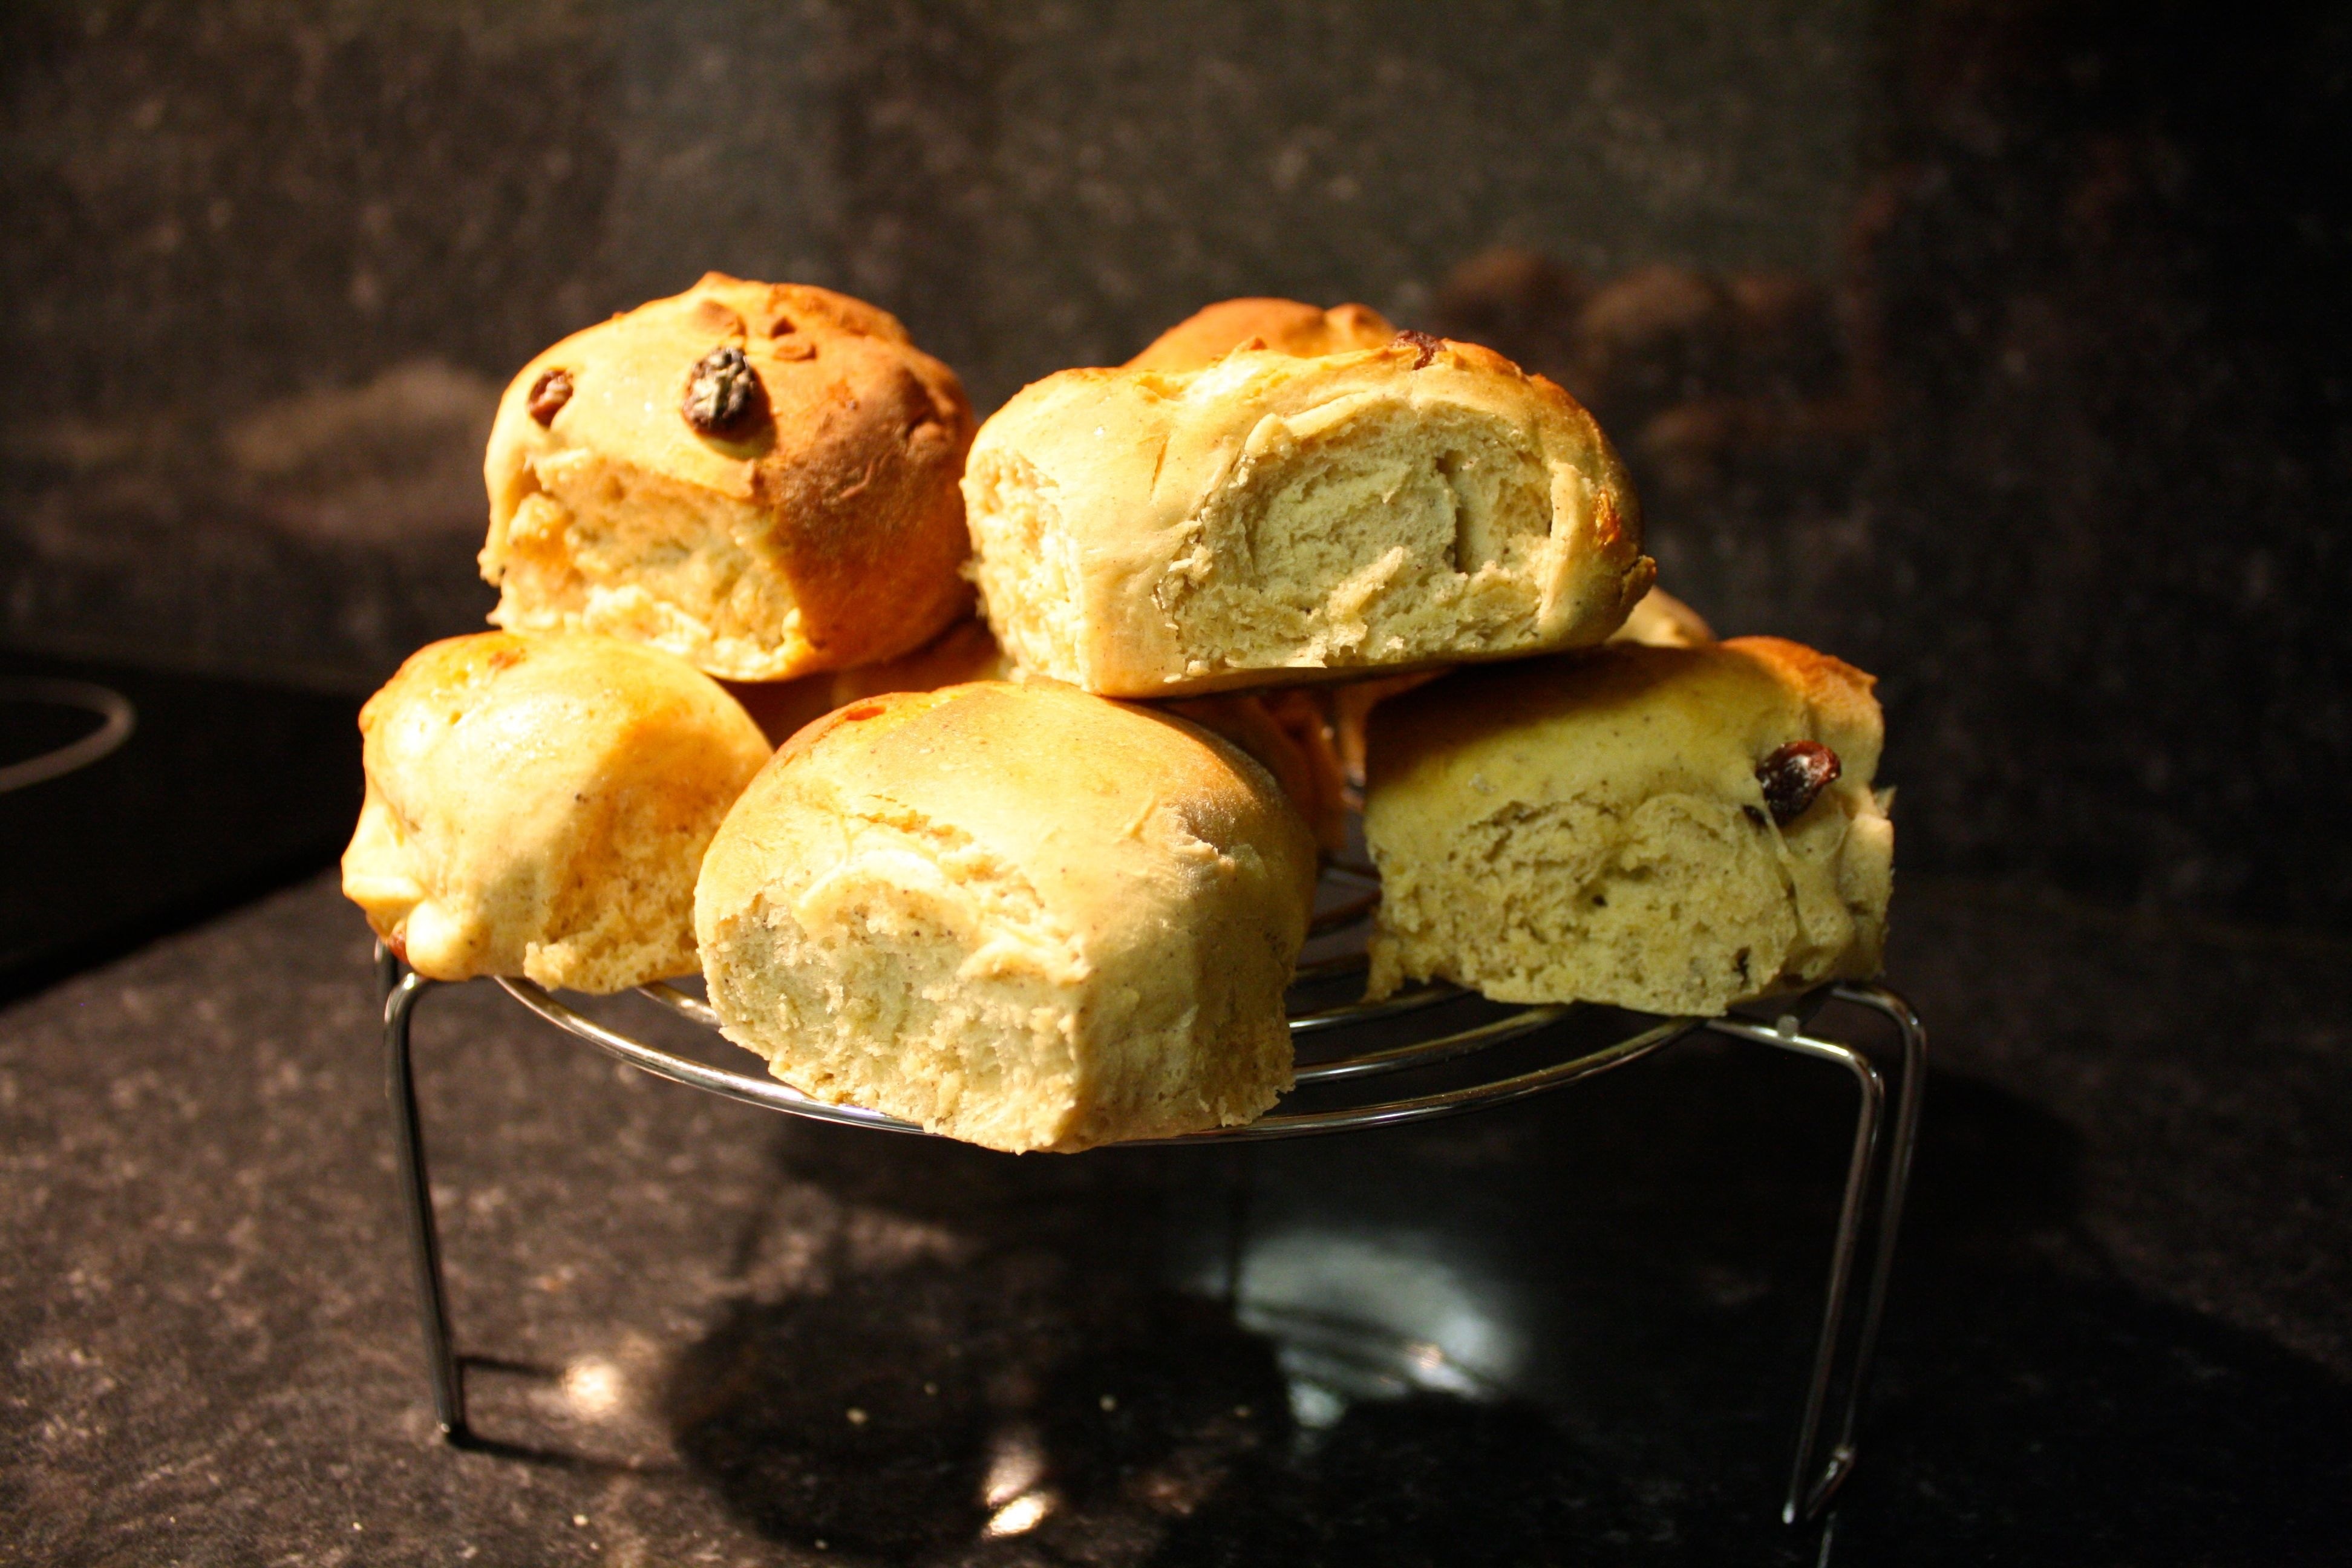 round pastry with raisins on top